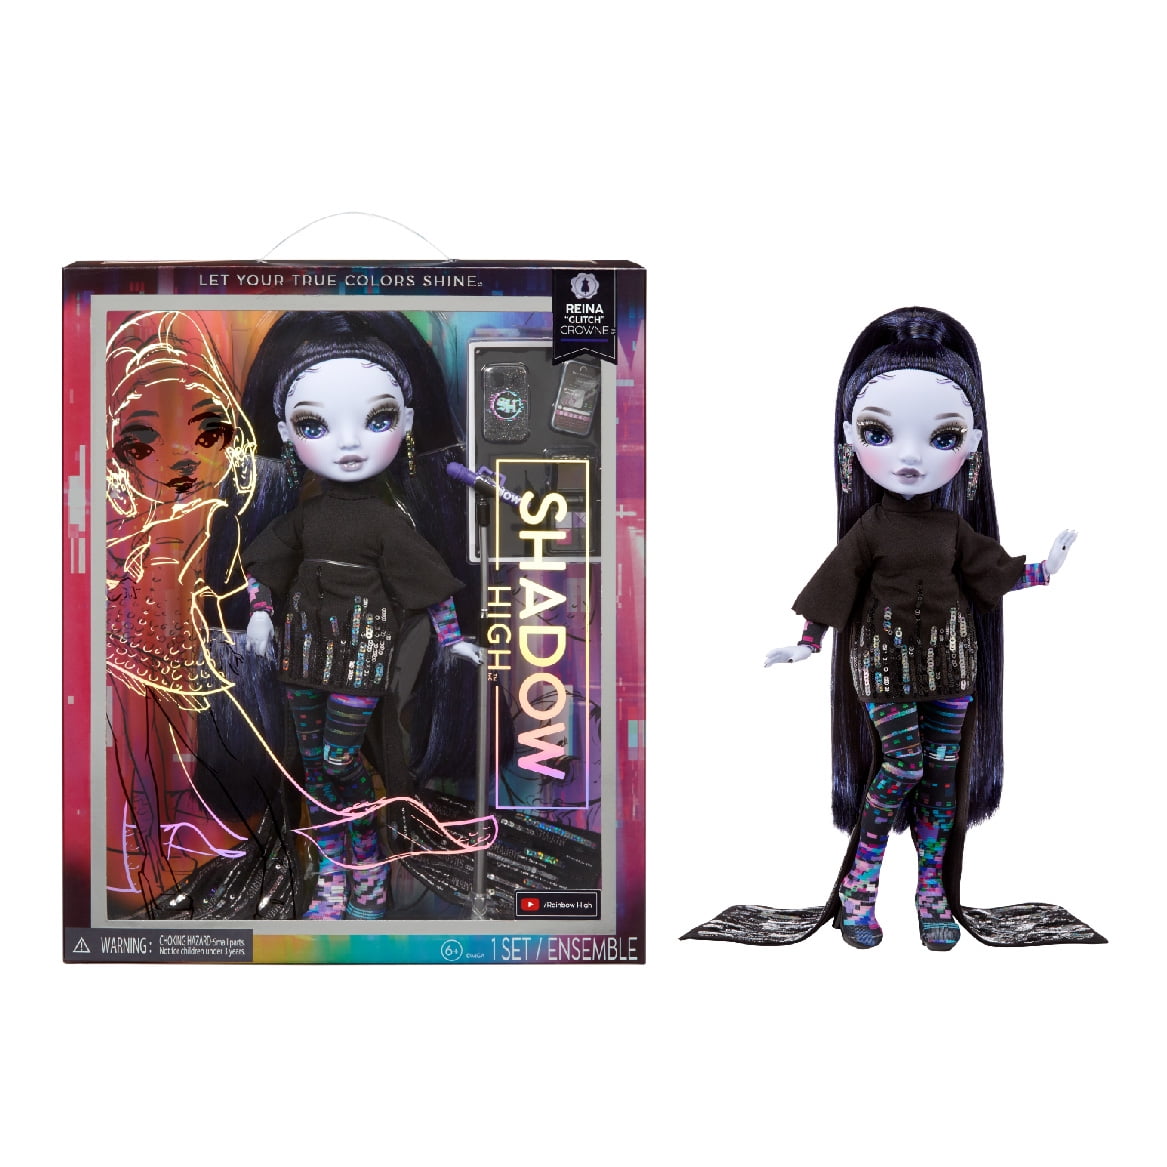 Rainbow High Shadow High Reina Glitch Crowne - Purple Fashion Doll. Fashionable Outfit & 10+ Colorful Play Accessories. Great Gift for Kids 4-12 Years Old & Collectors